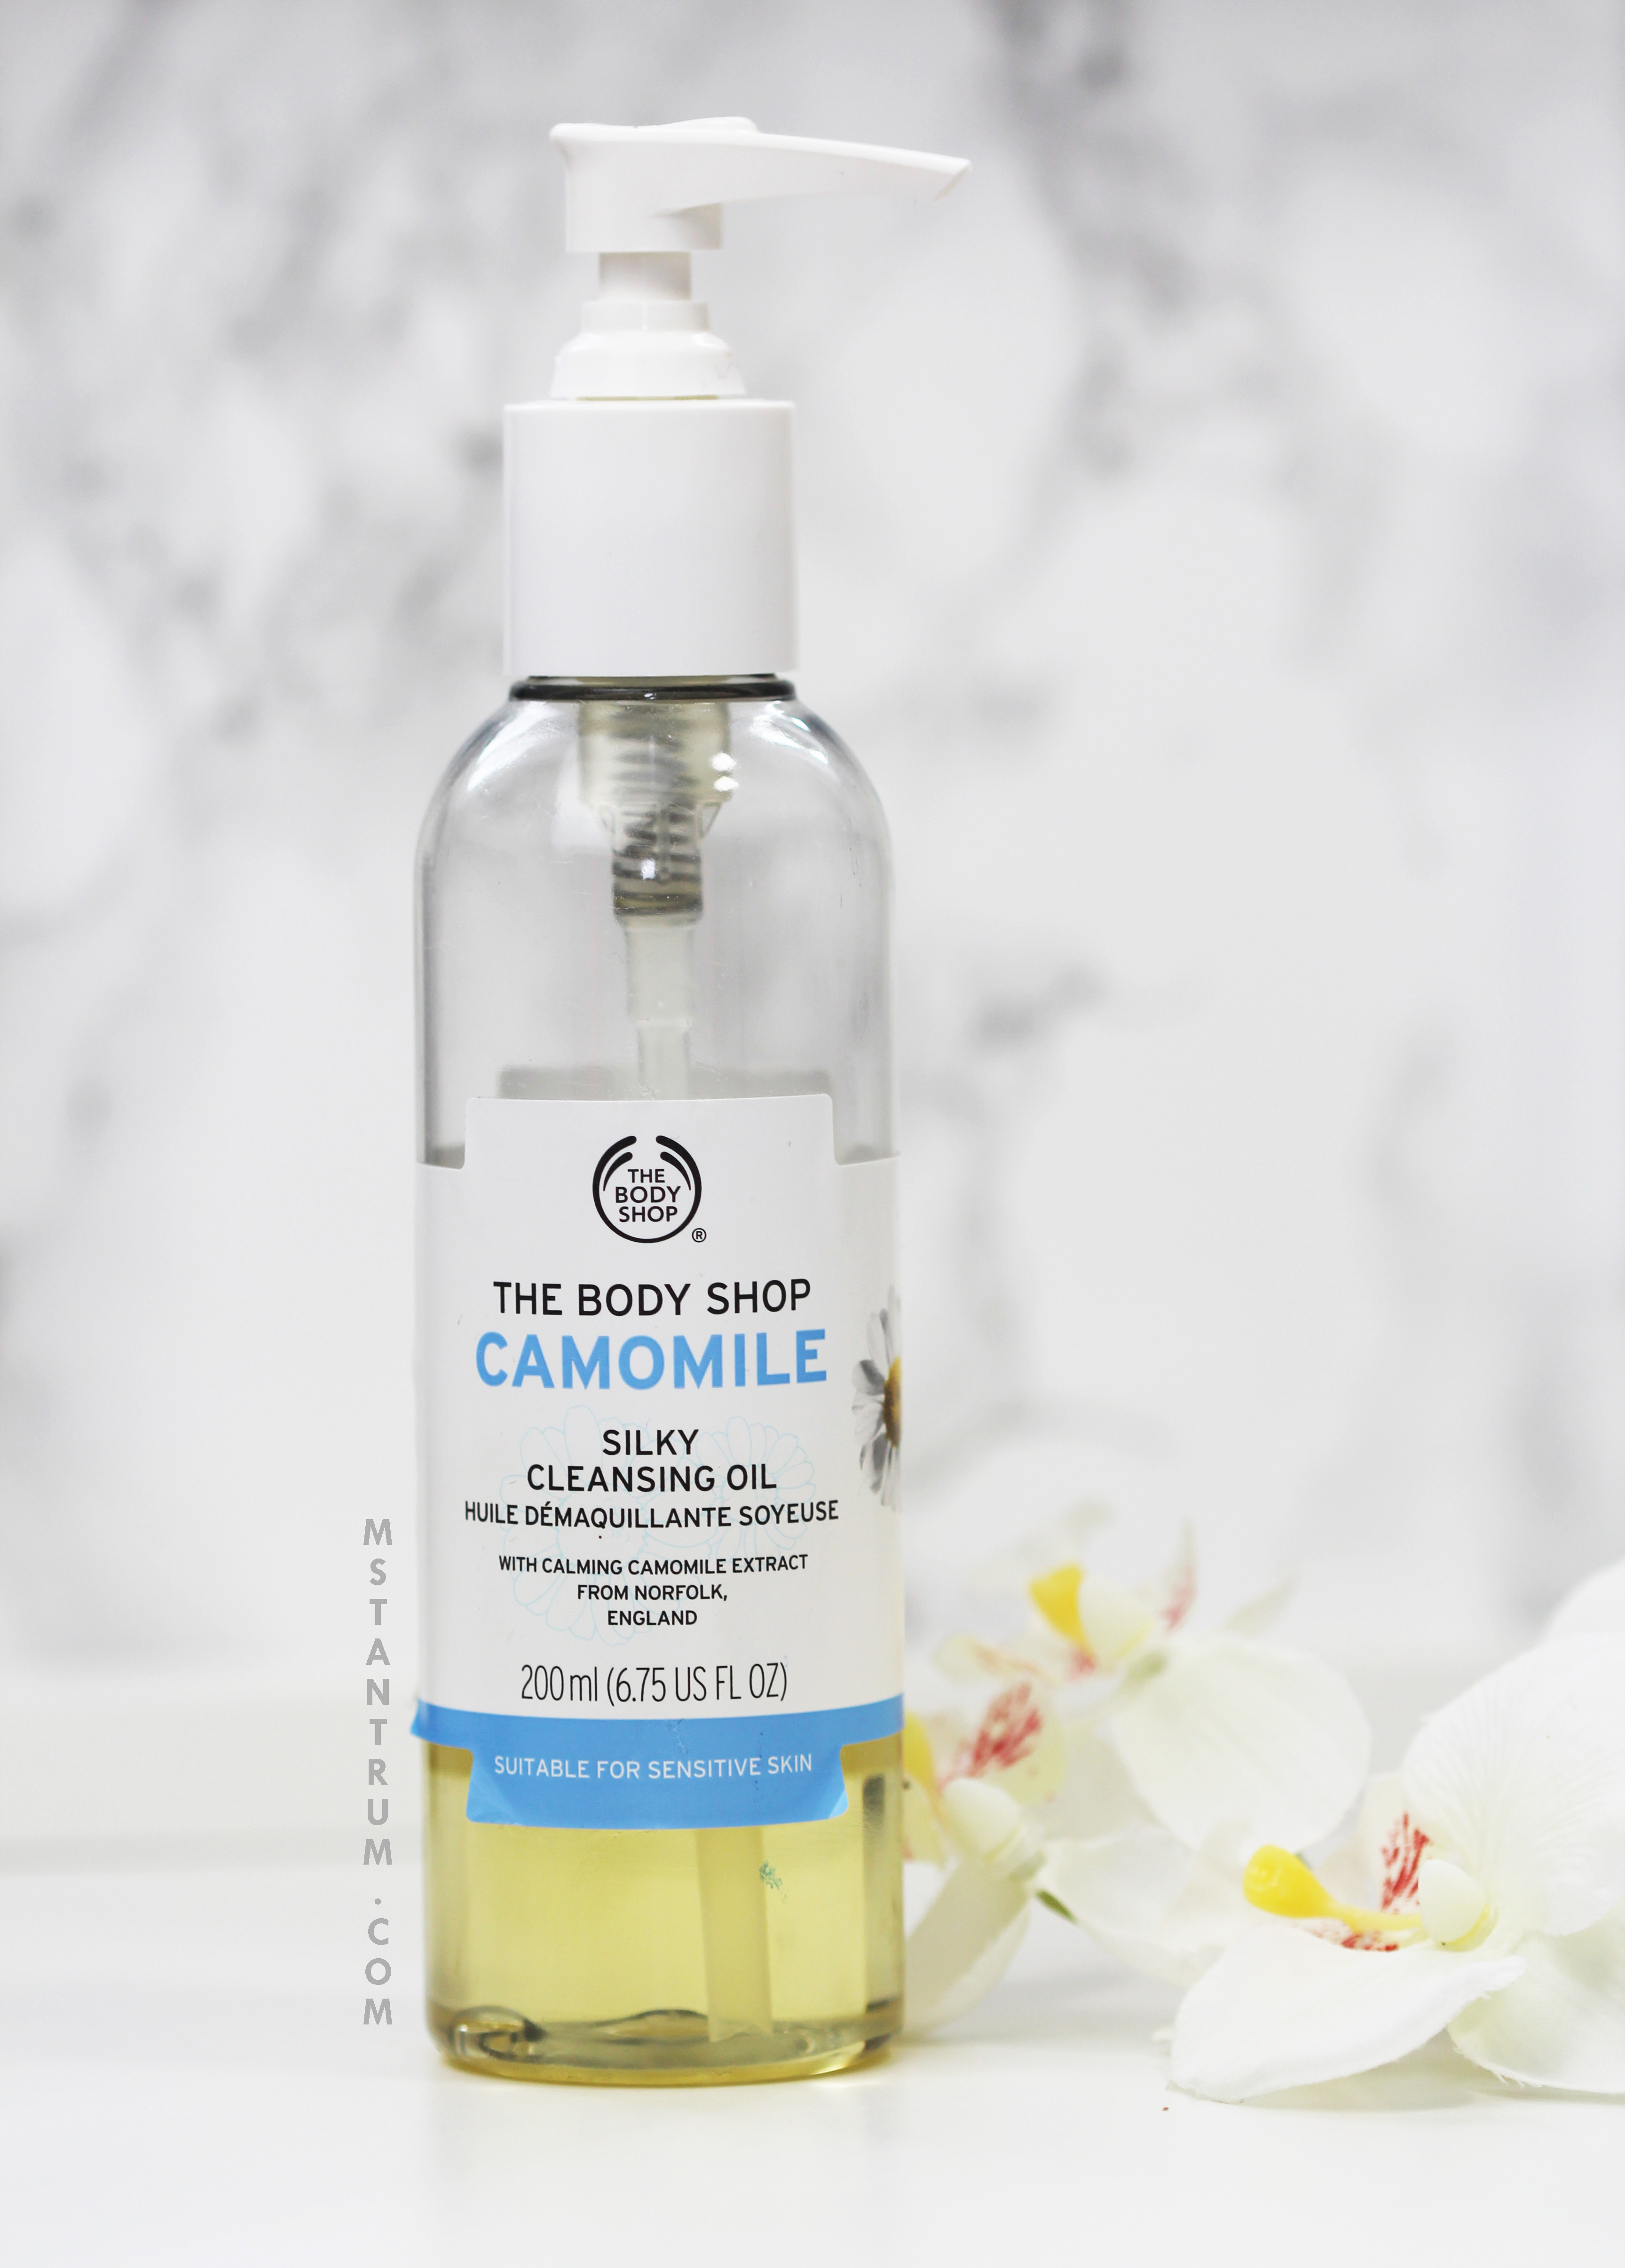 The Bodyshop cleansing oil